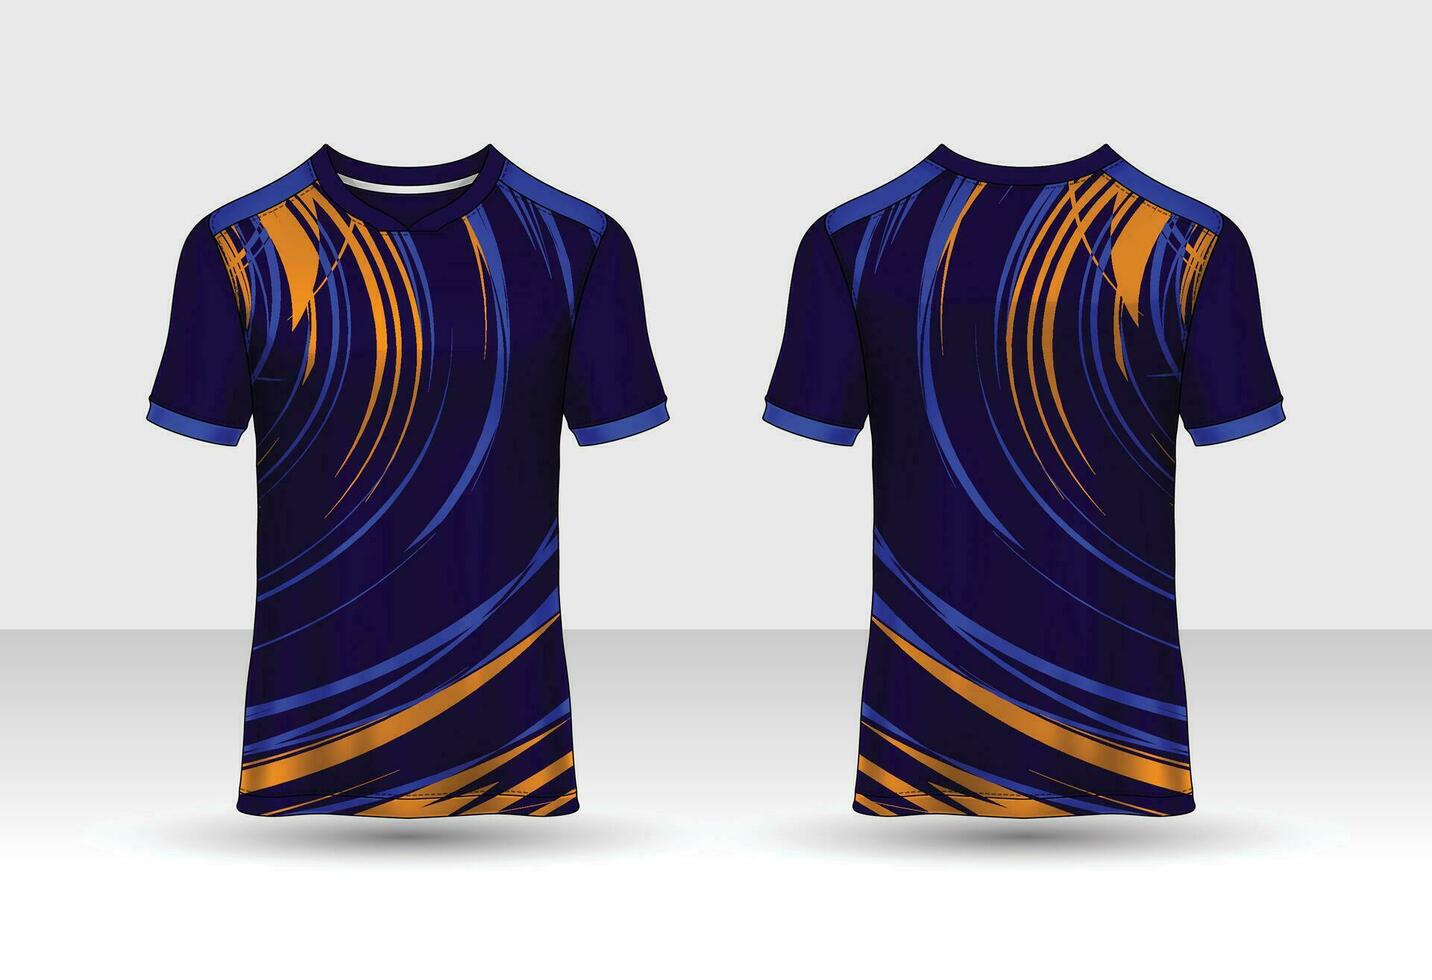 Sports t-shirt jersey design concept vector template, rhombus pattern v neck Football jersey concept with front and back view for Soccer, Cricket, Volleyball, Rugby, tennis, badminton uniform kit